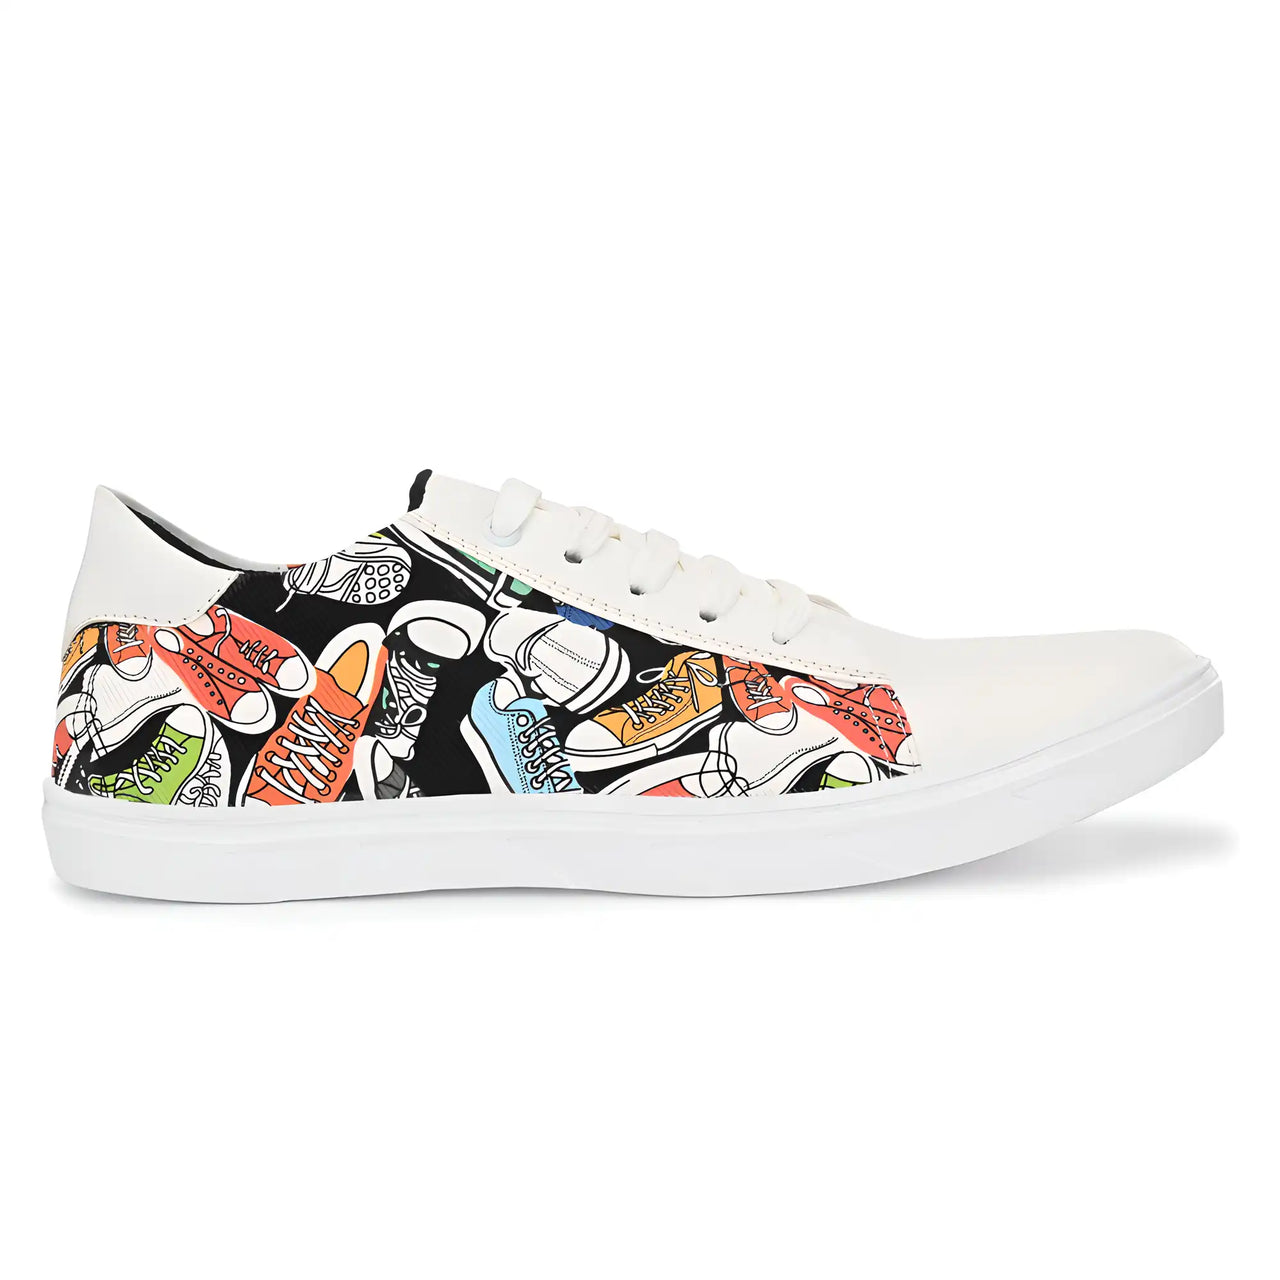 Cool Printed Casual Men's Sneakers by Castoes